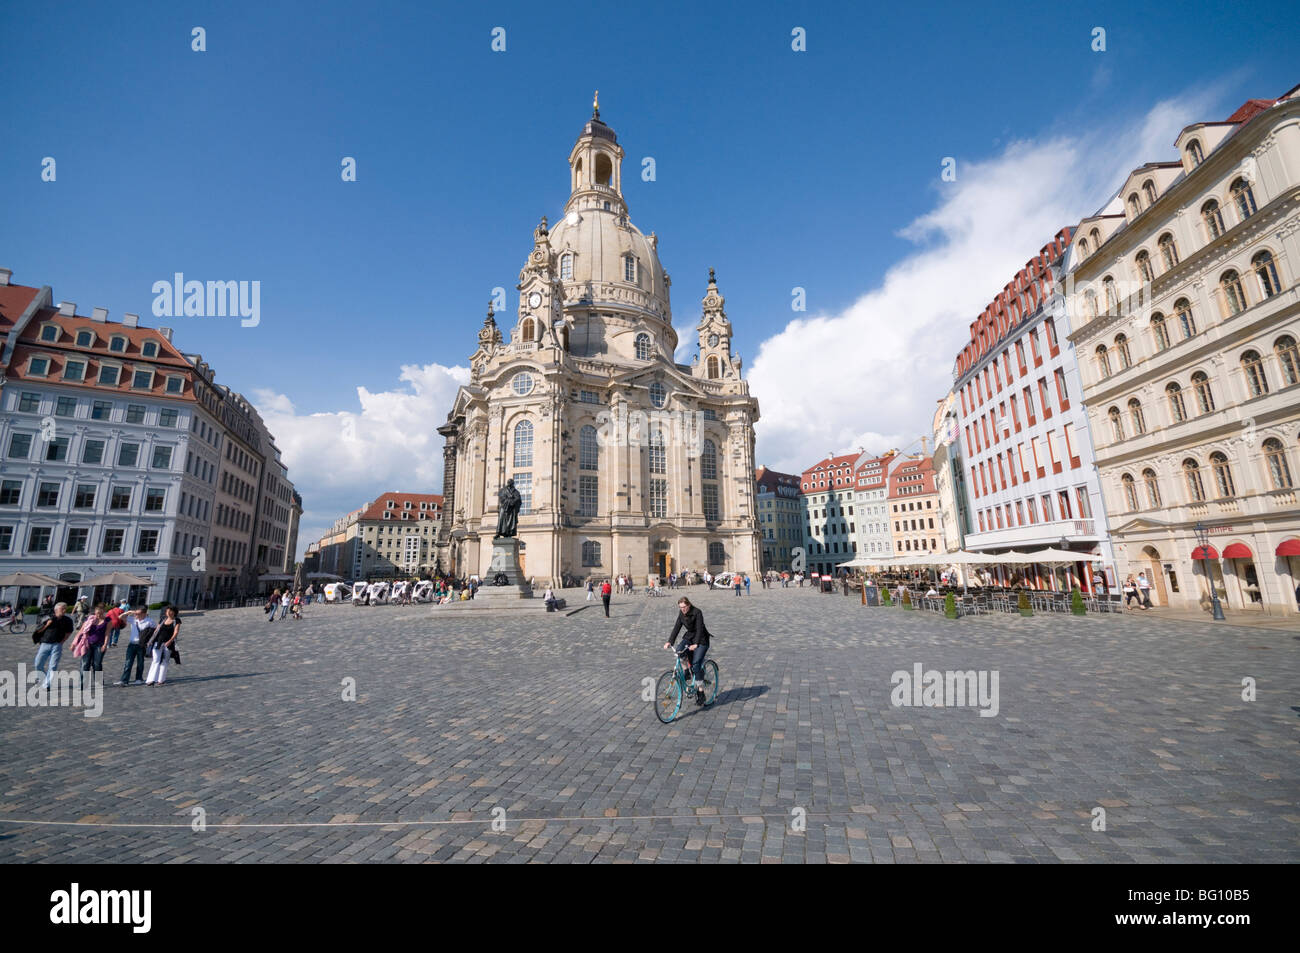 Frauenkirche (Church of Our Lady), Dresden, Saxony, Germany, Europe Stock Photo